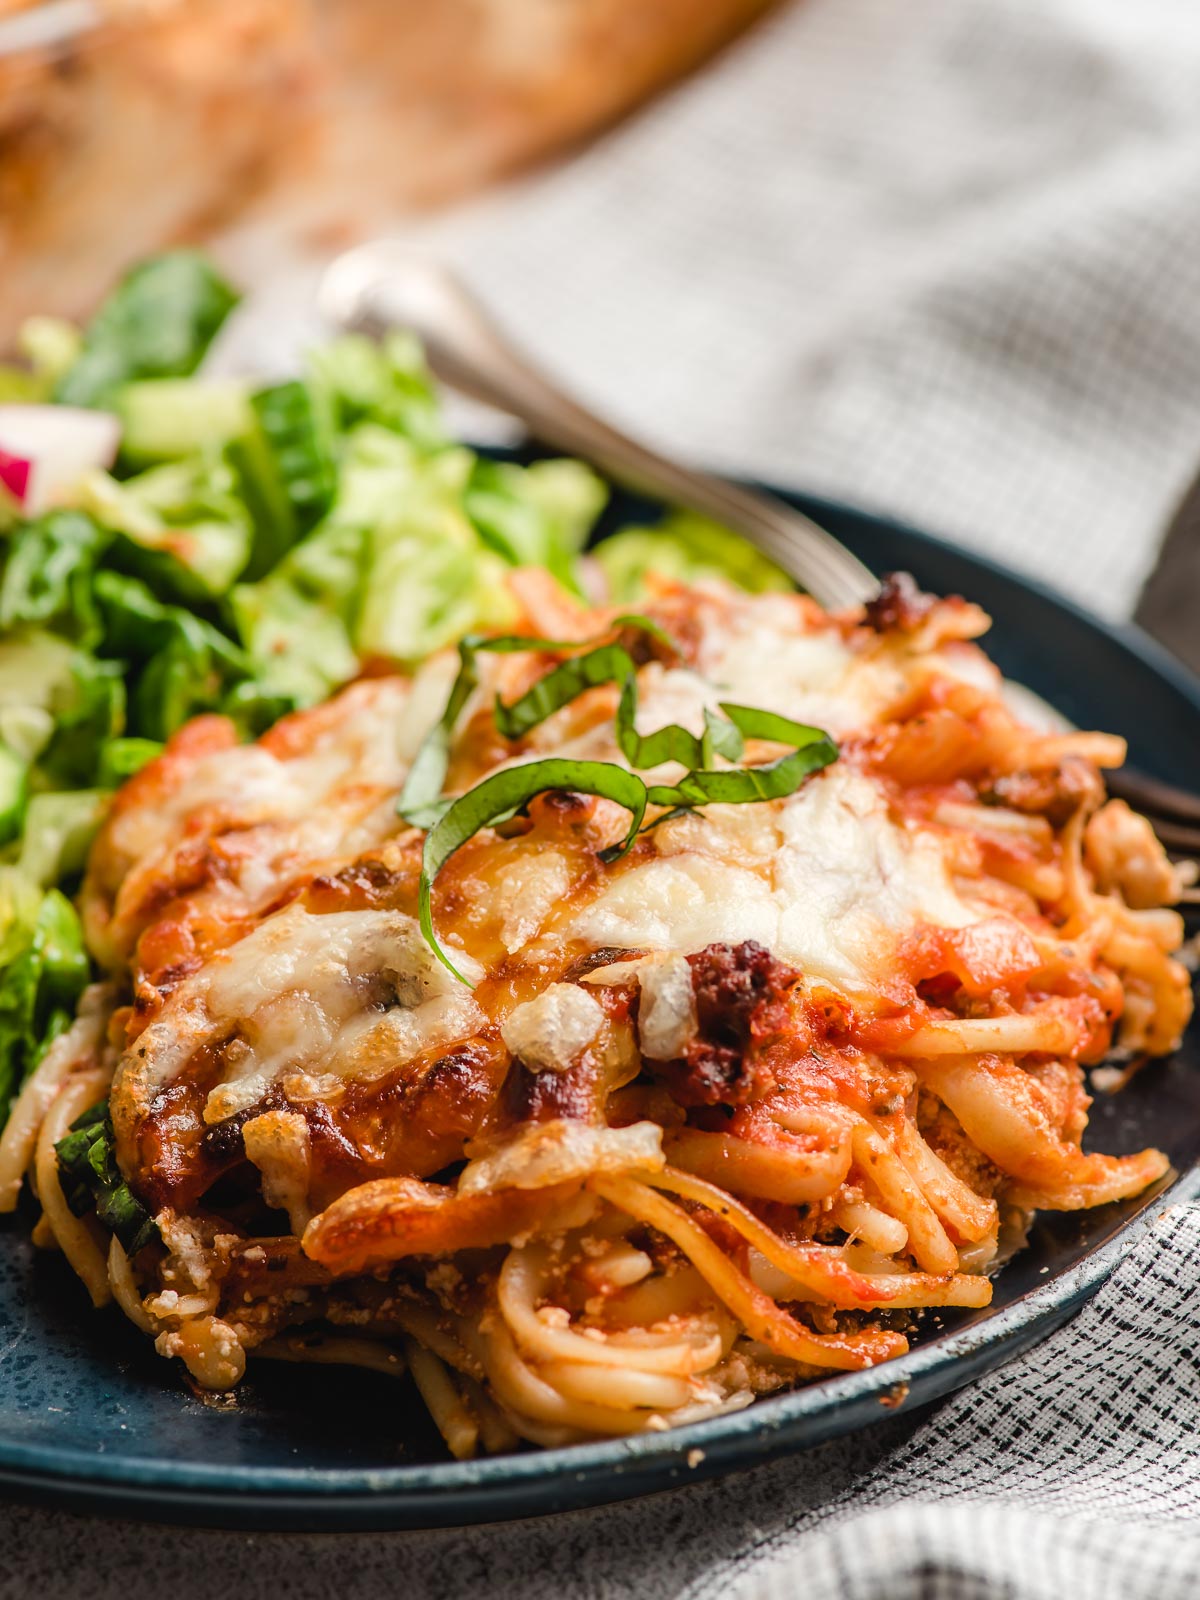 Baked spaghetti casserole served on a navy blue plate with salad greens.